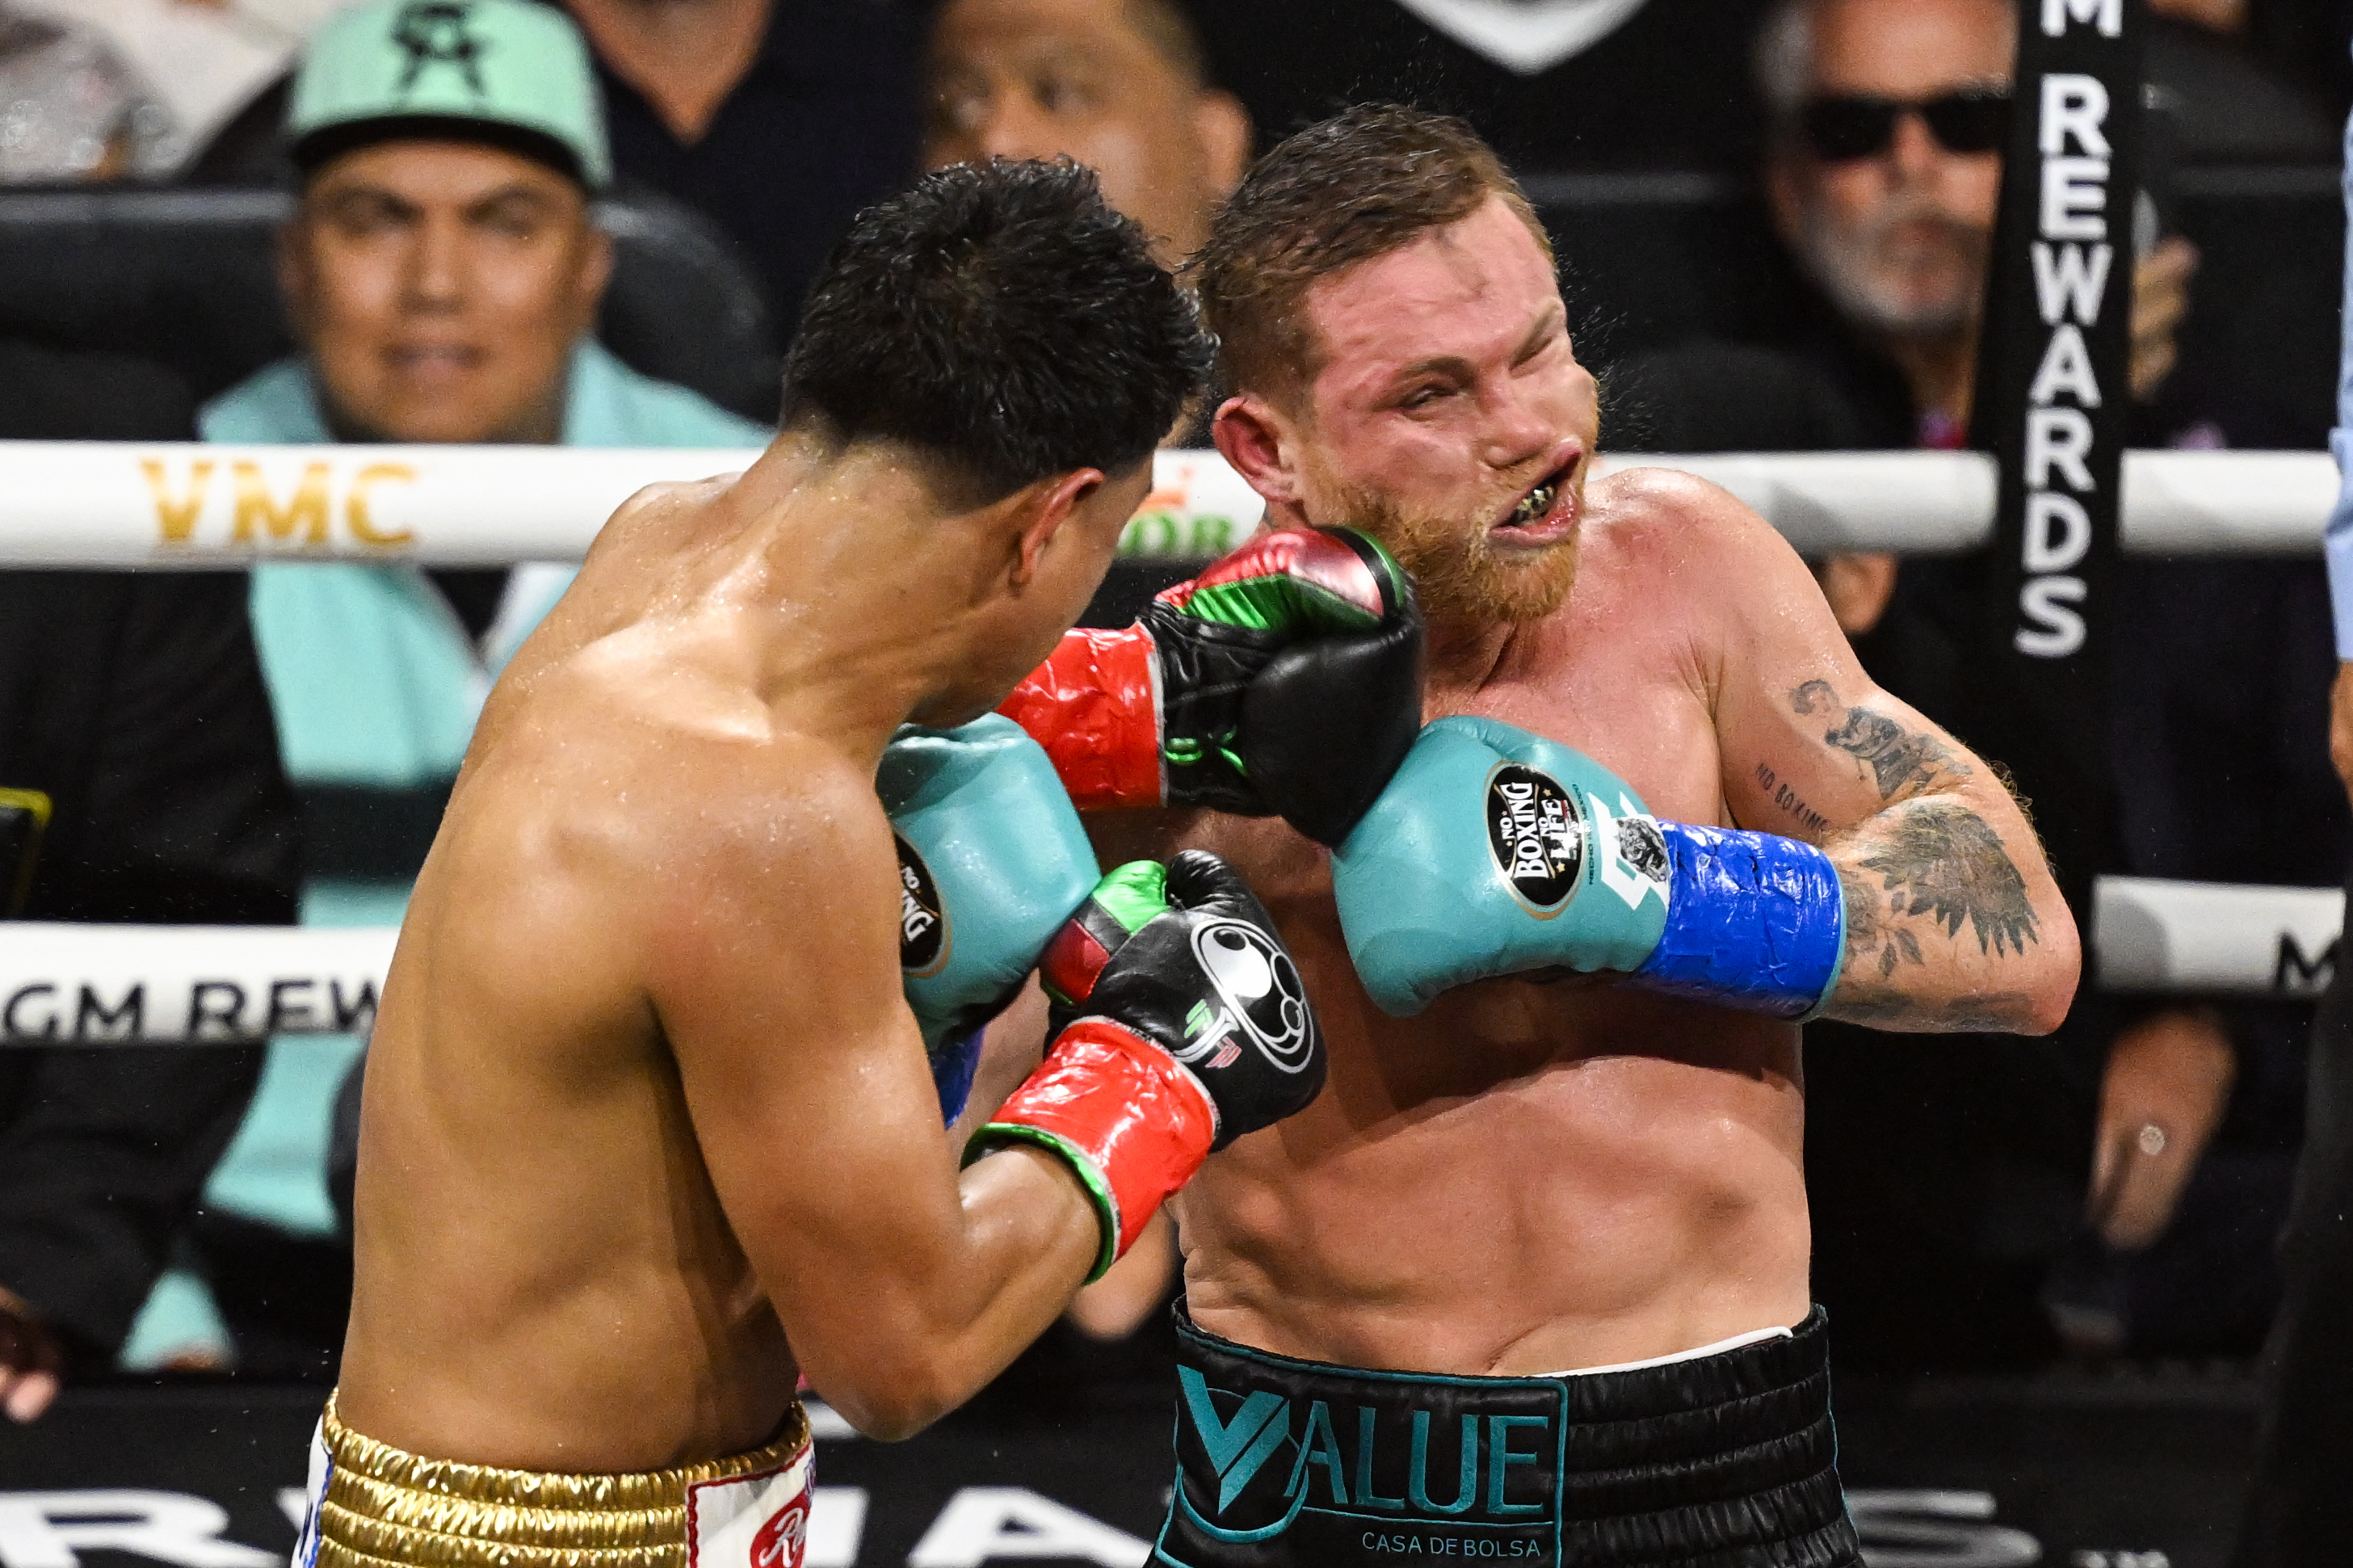 Canelo Álvarez defeats Jaime Munguía by unanimous decision: Round-by-round analysis - Round 4 examination including key punches and defensive tactics